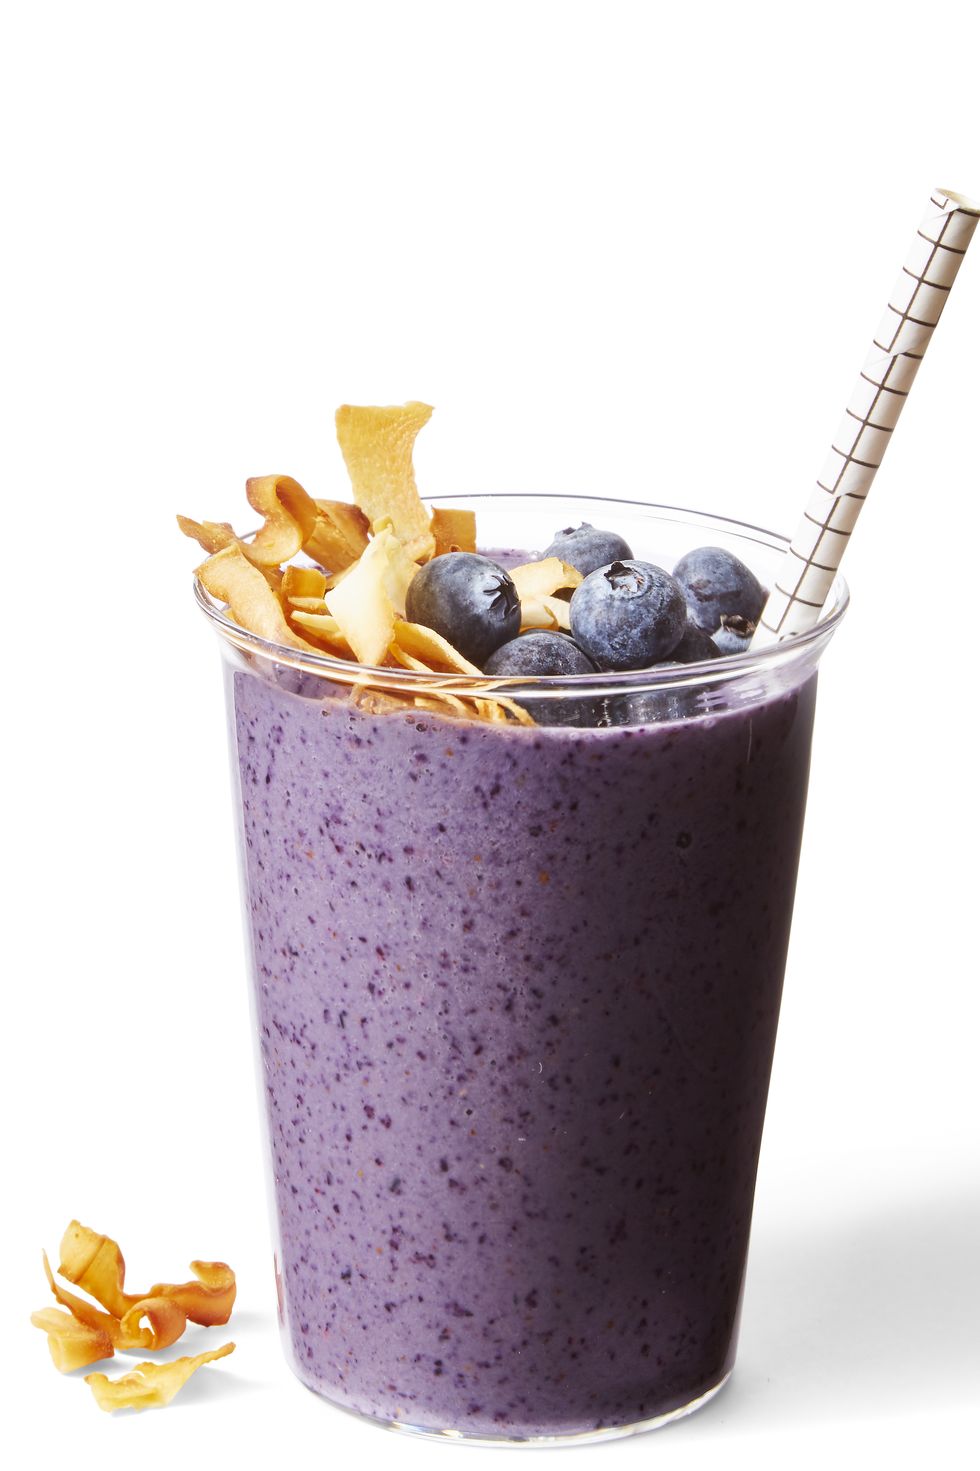 blueberry and nut butter smoothie